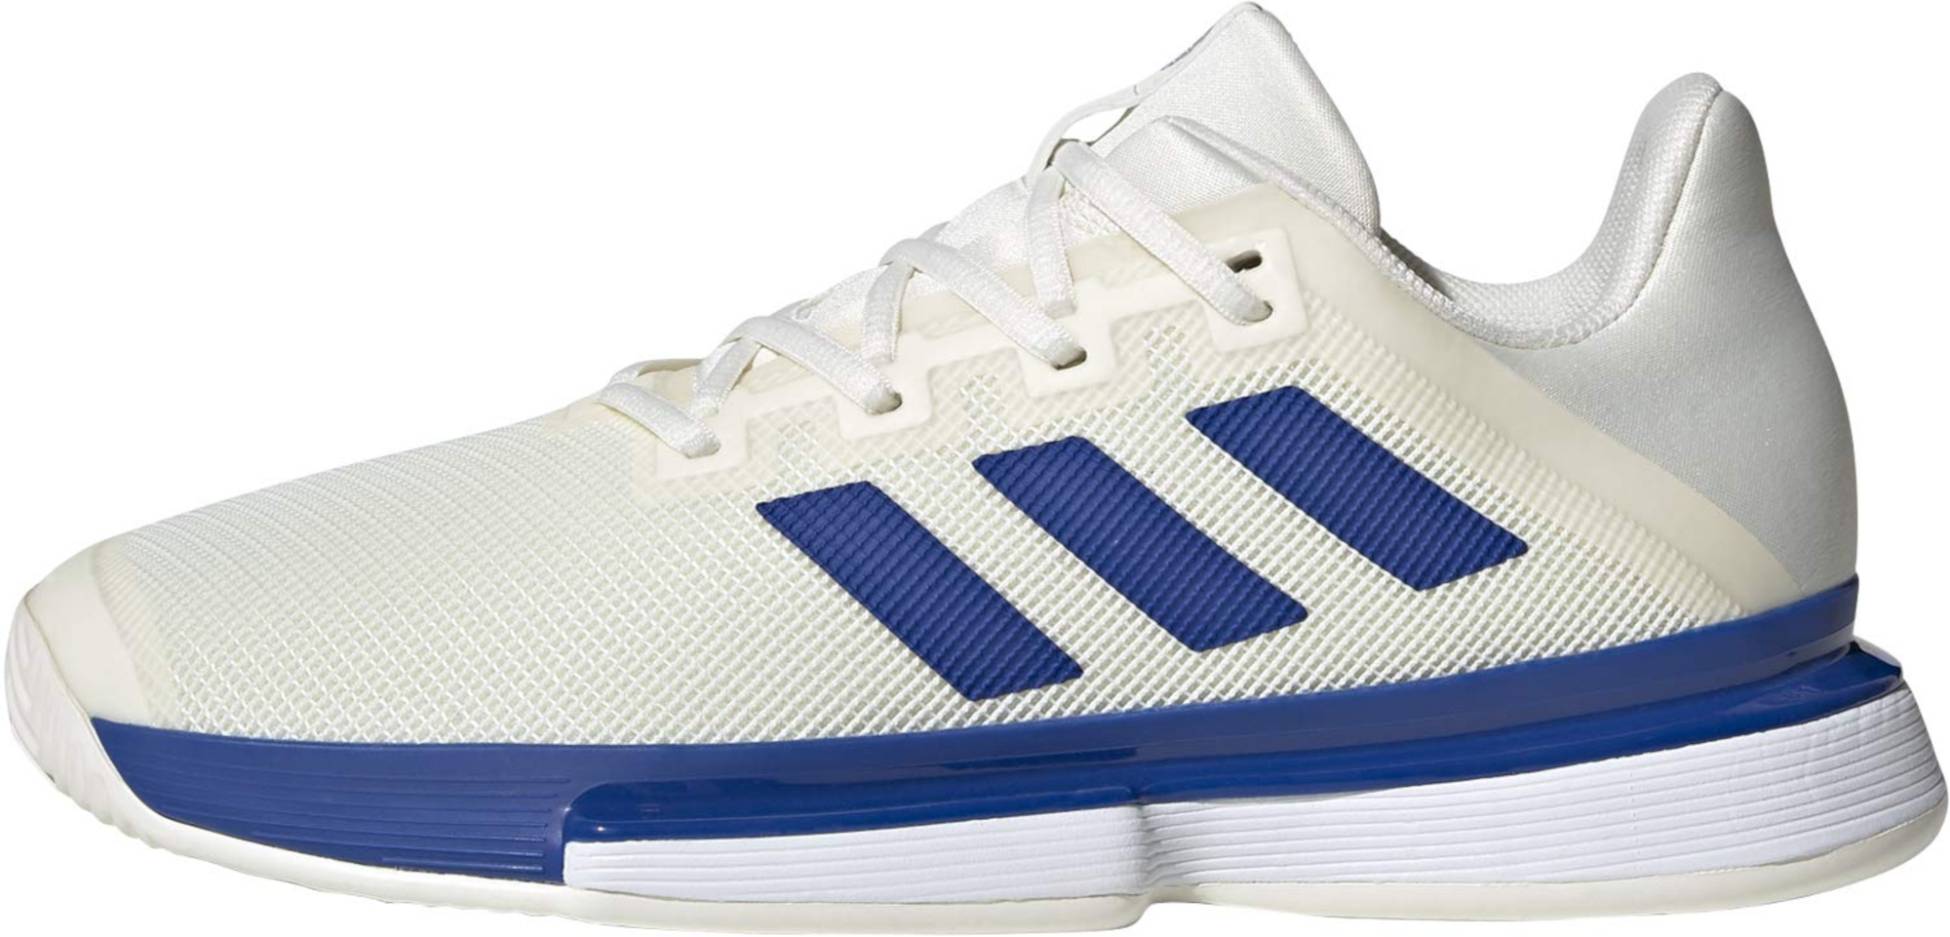 adidas rubber sole shoes